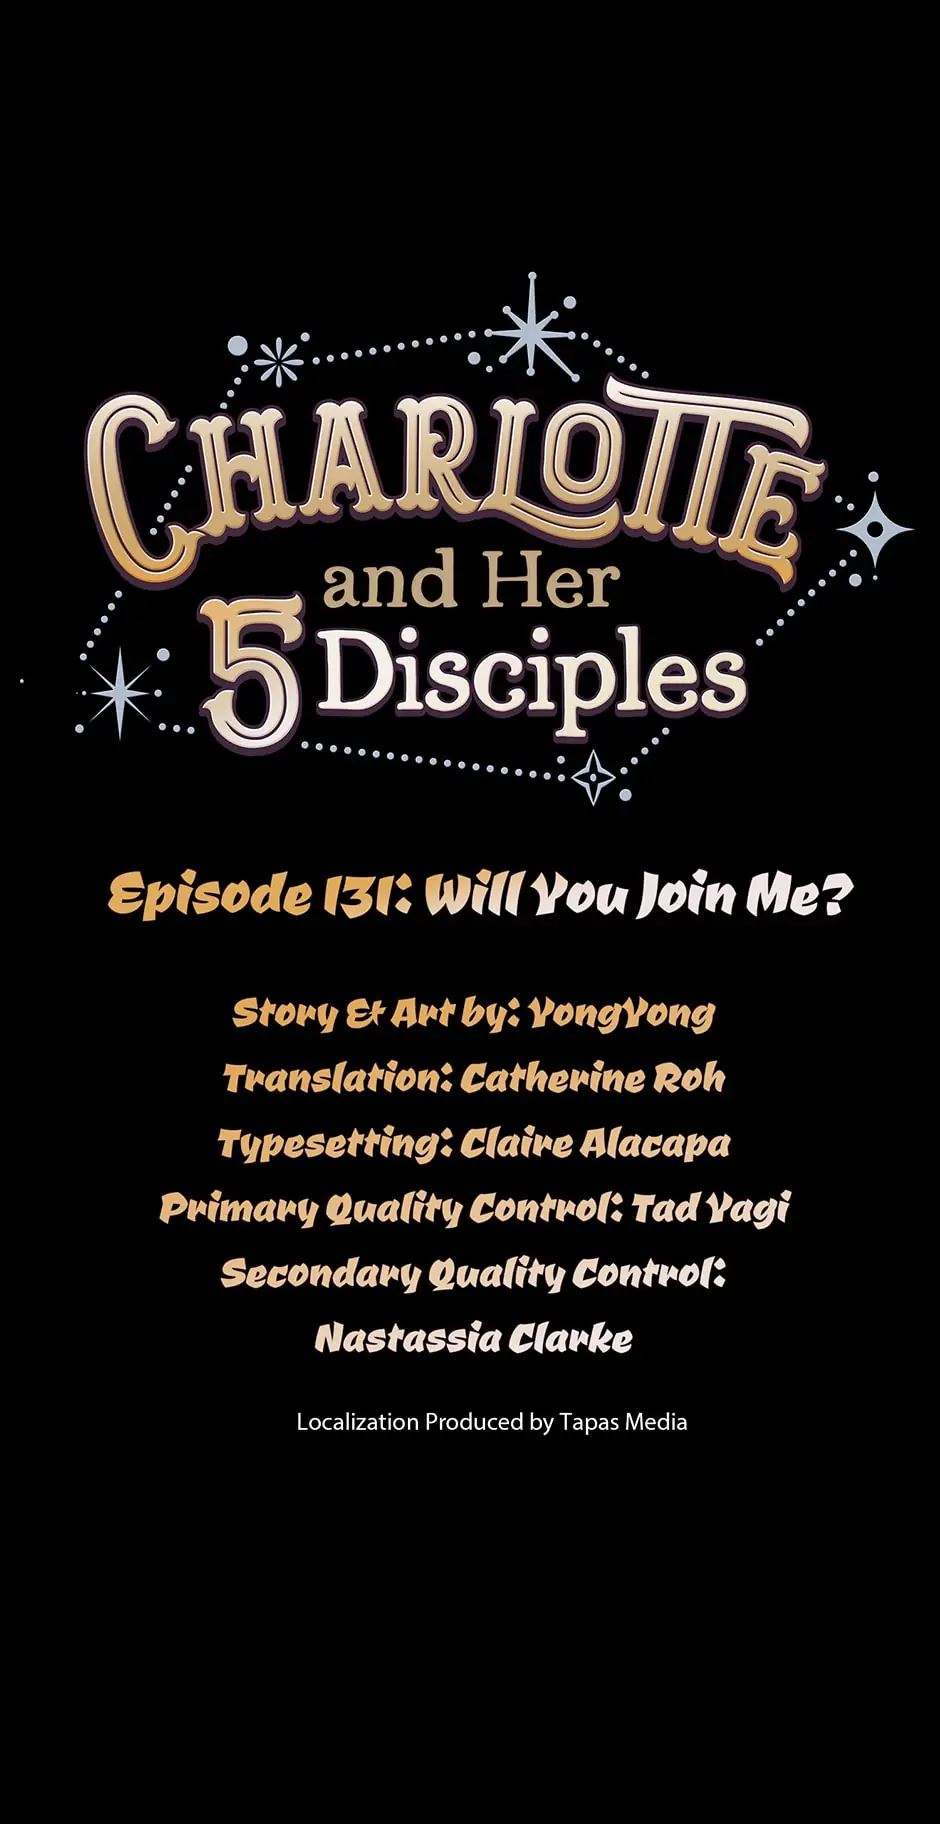 Charlotte and Her 5 Disciples image